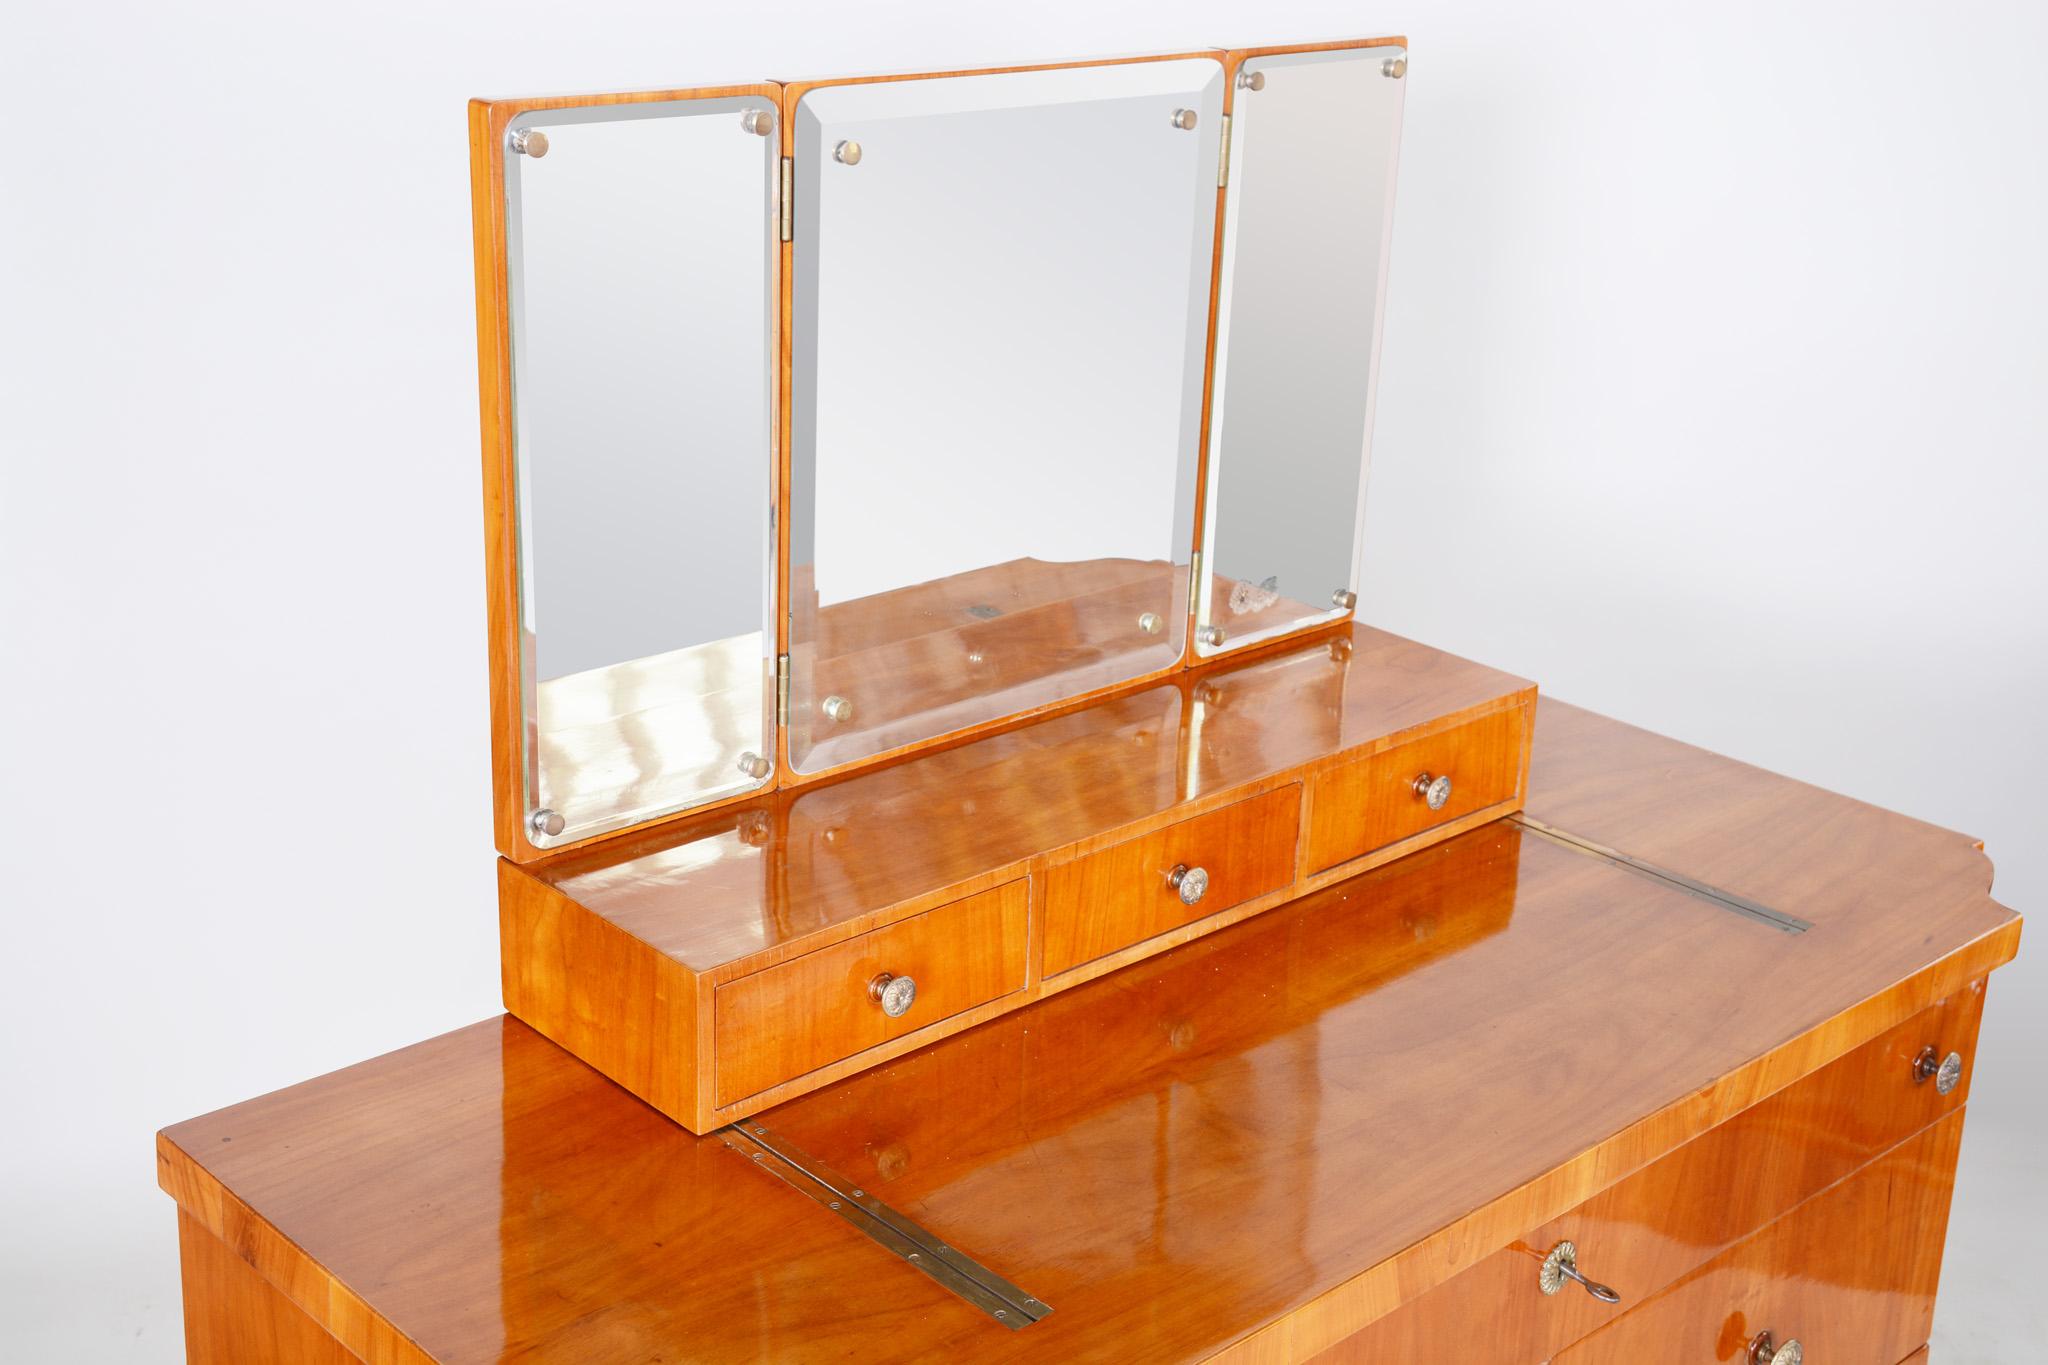 Unique Czech Art Deco Dressing Table with Mirror, Cherry-Tree, Restored, 1920s For Sale 9